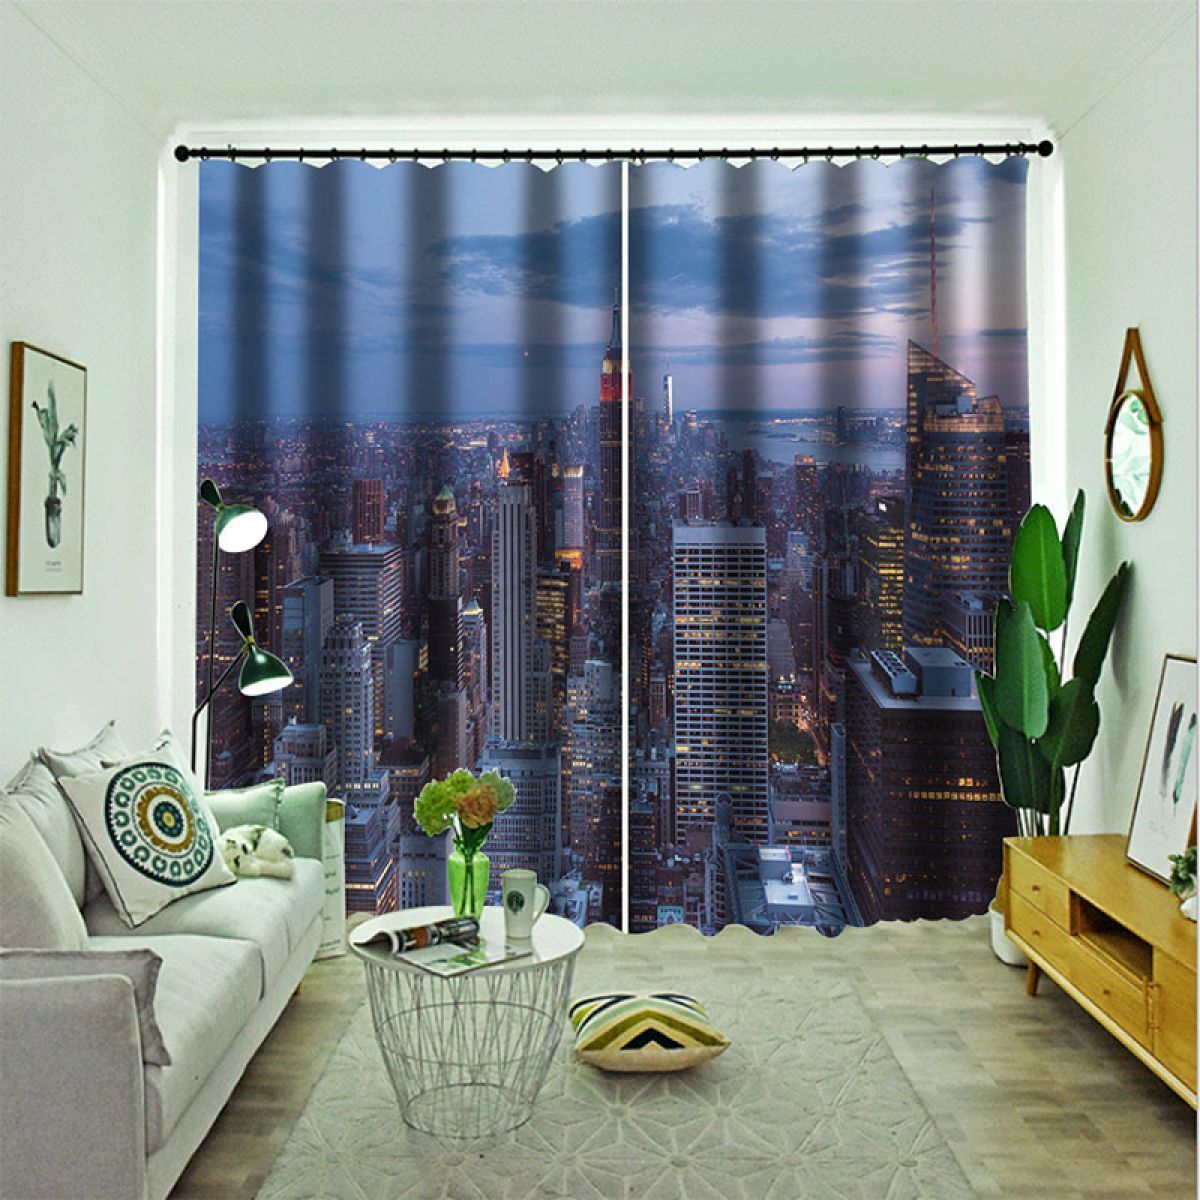 3d City High Rise Building Scenery Printed Window Curtain Home Decor